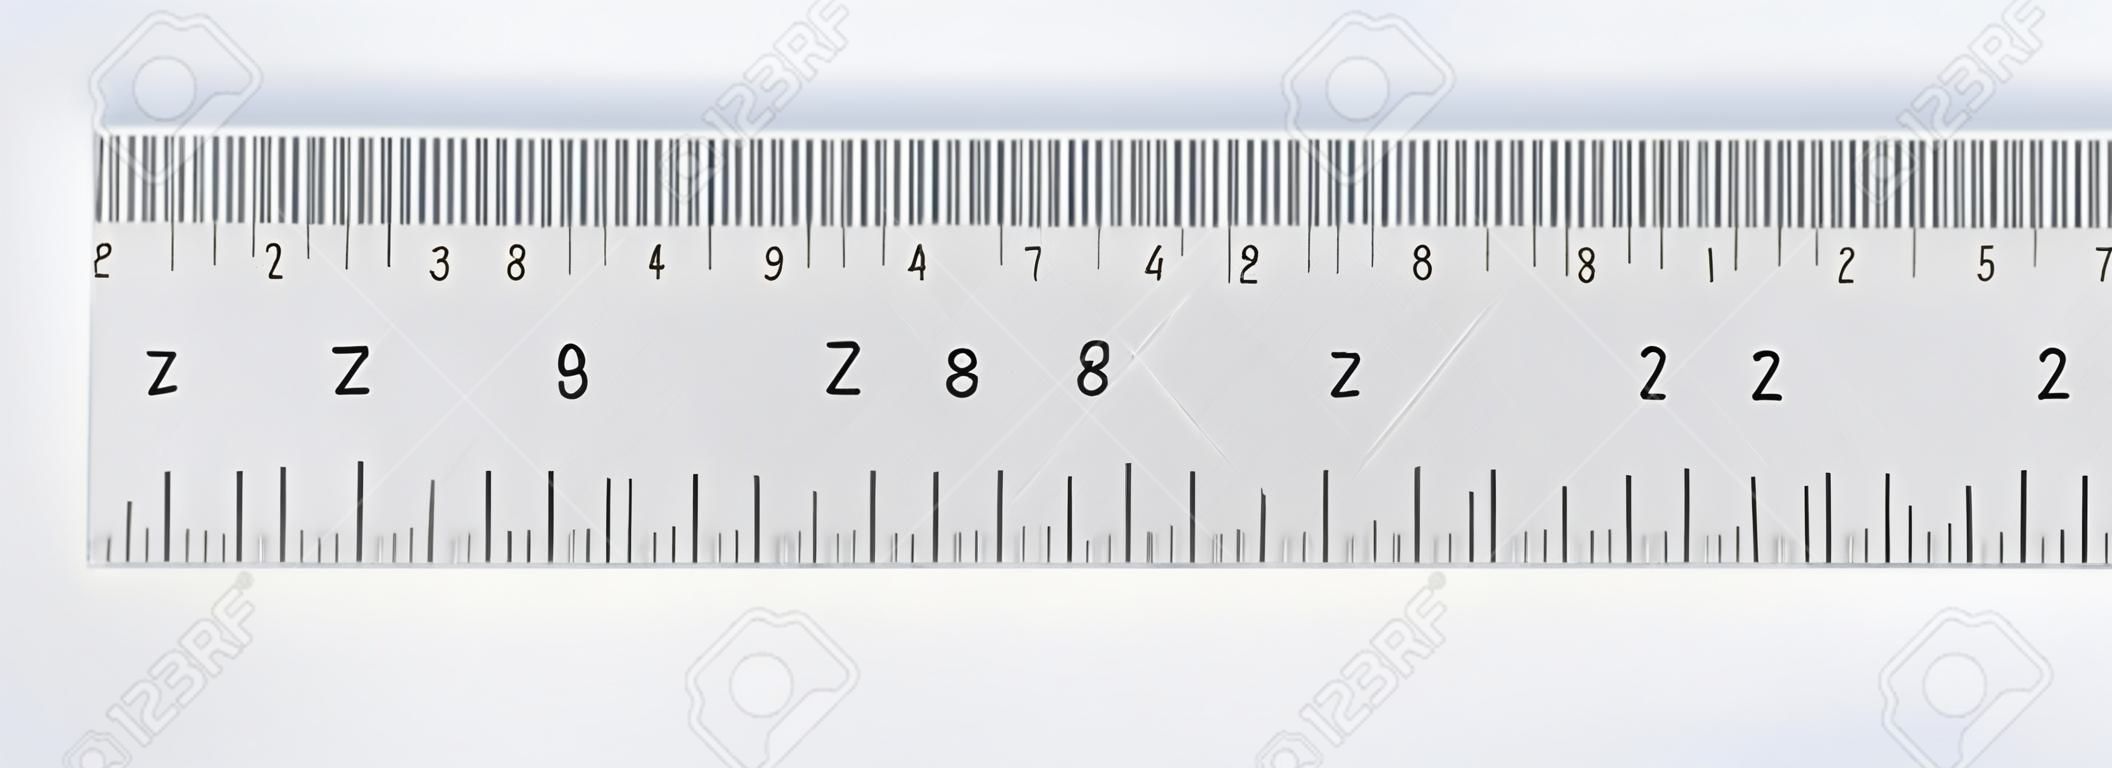 Vector realistic school ruler isolated on transparent background